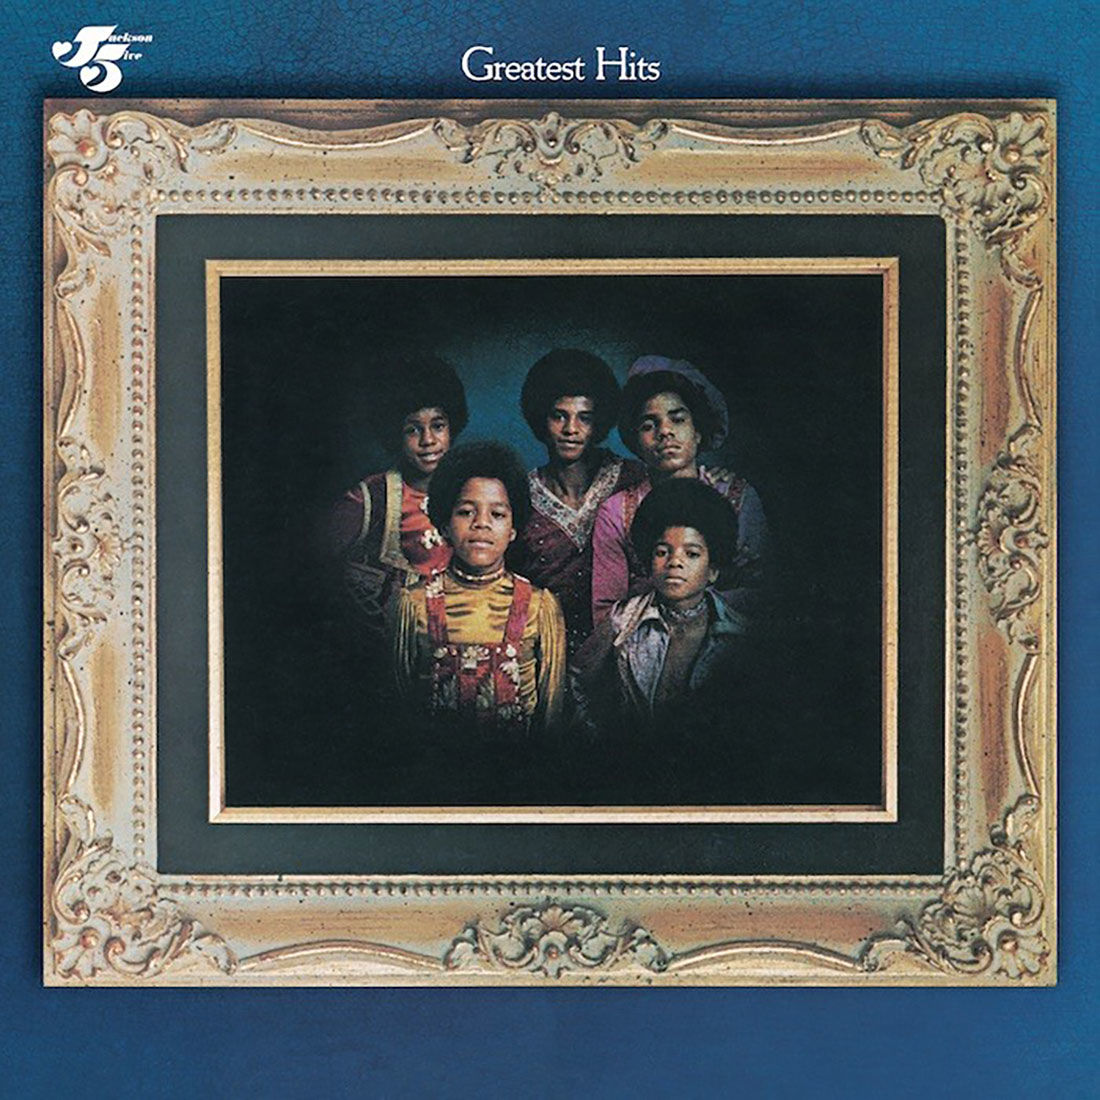 The Jackson 5 - Greatest Hits (Greatest Hits)